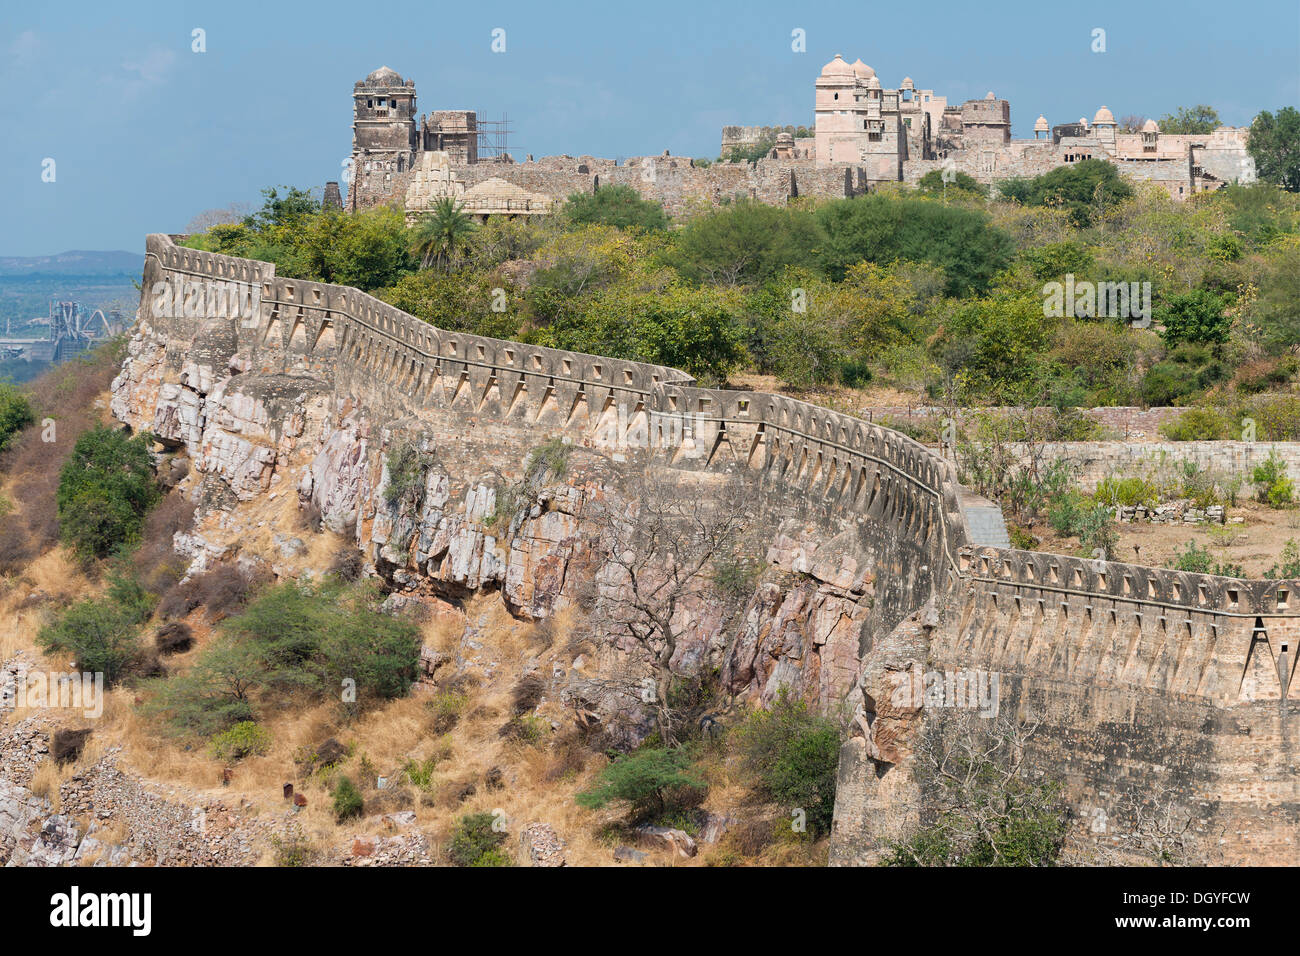 Fortified wall, Chittorgarh Fort of the Hindu Rajput princes, Chittorgarh, Rajasthan, India Stock Photo